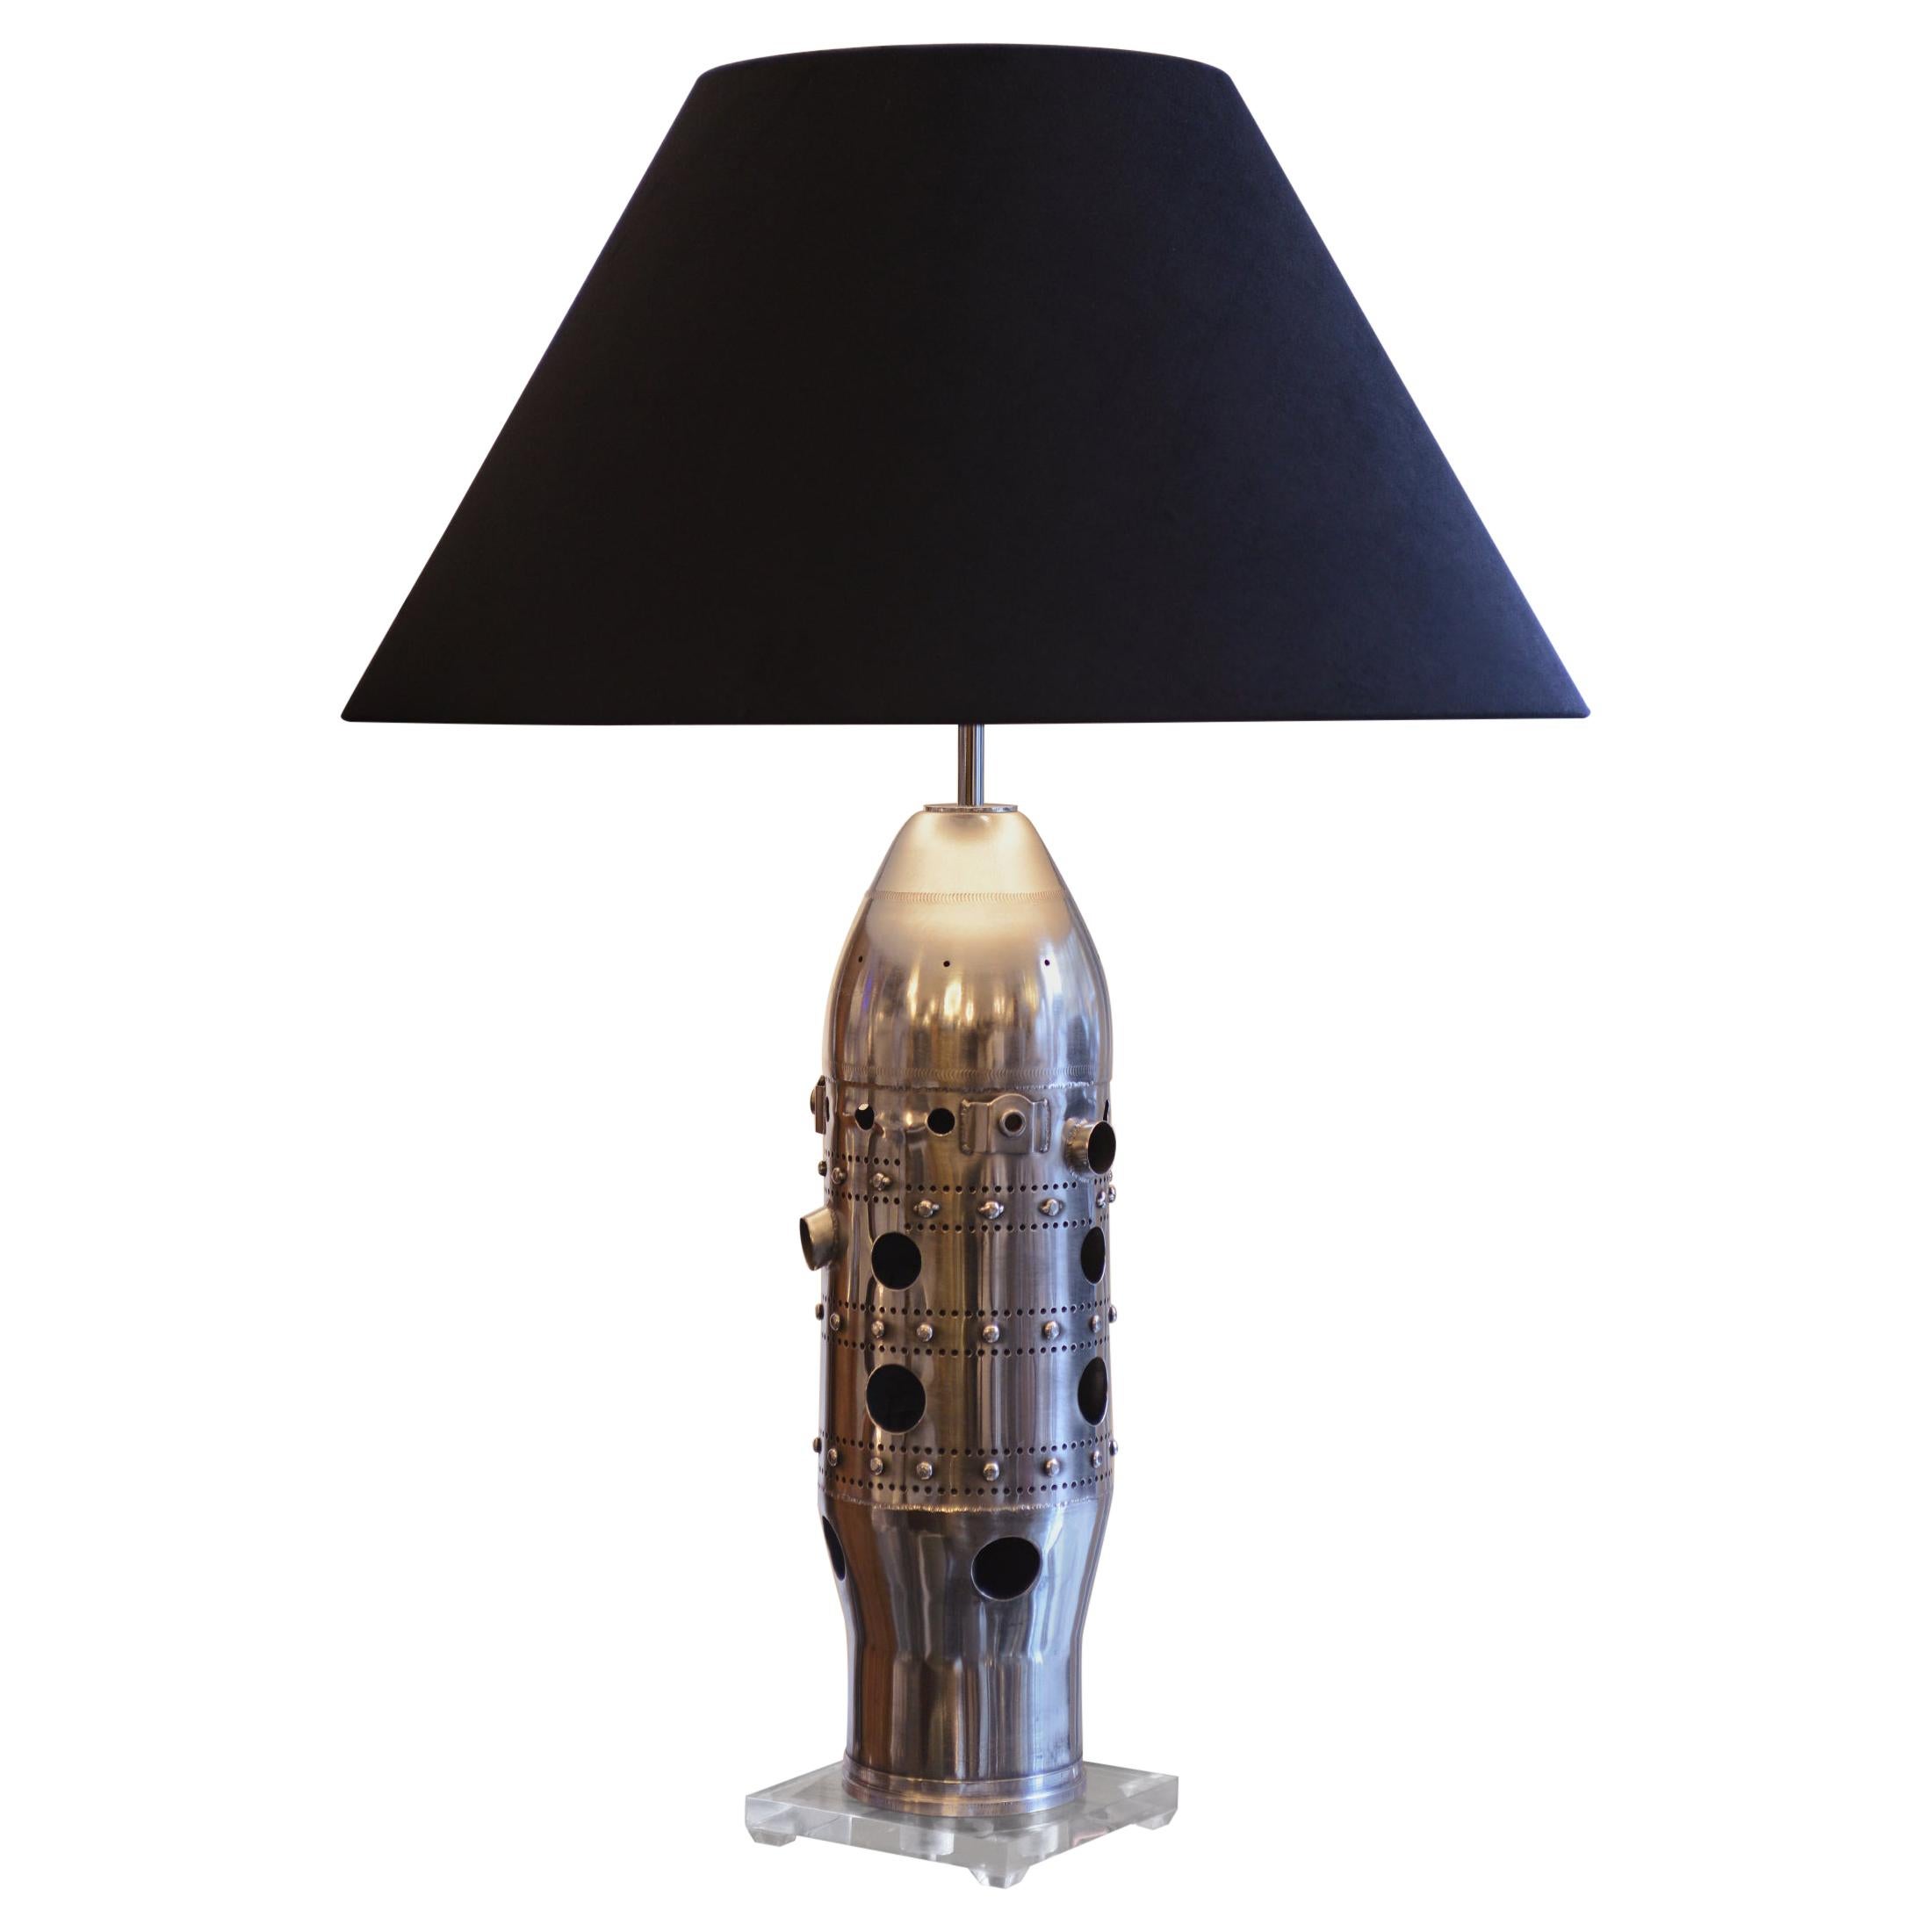 CFM56 Combustion Chamber Table Lamp